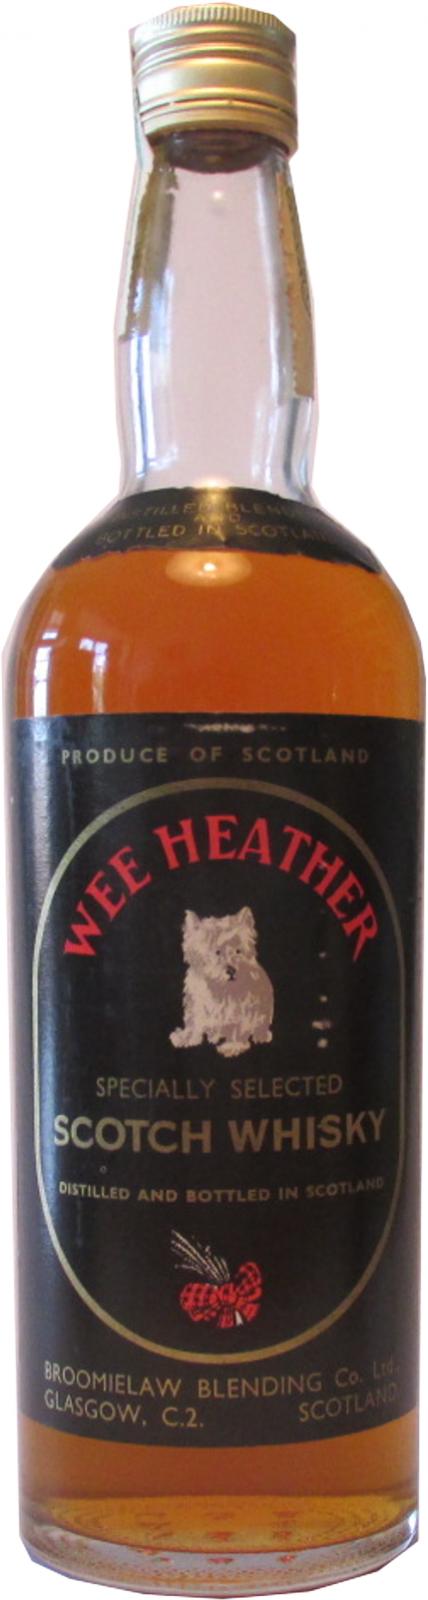 Wee Heather Specially Selected Scotch Whisky